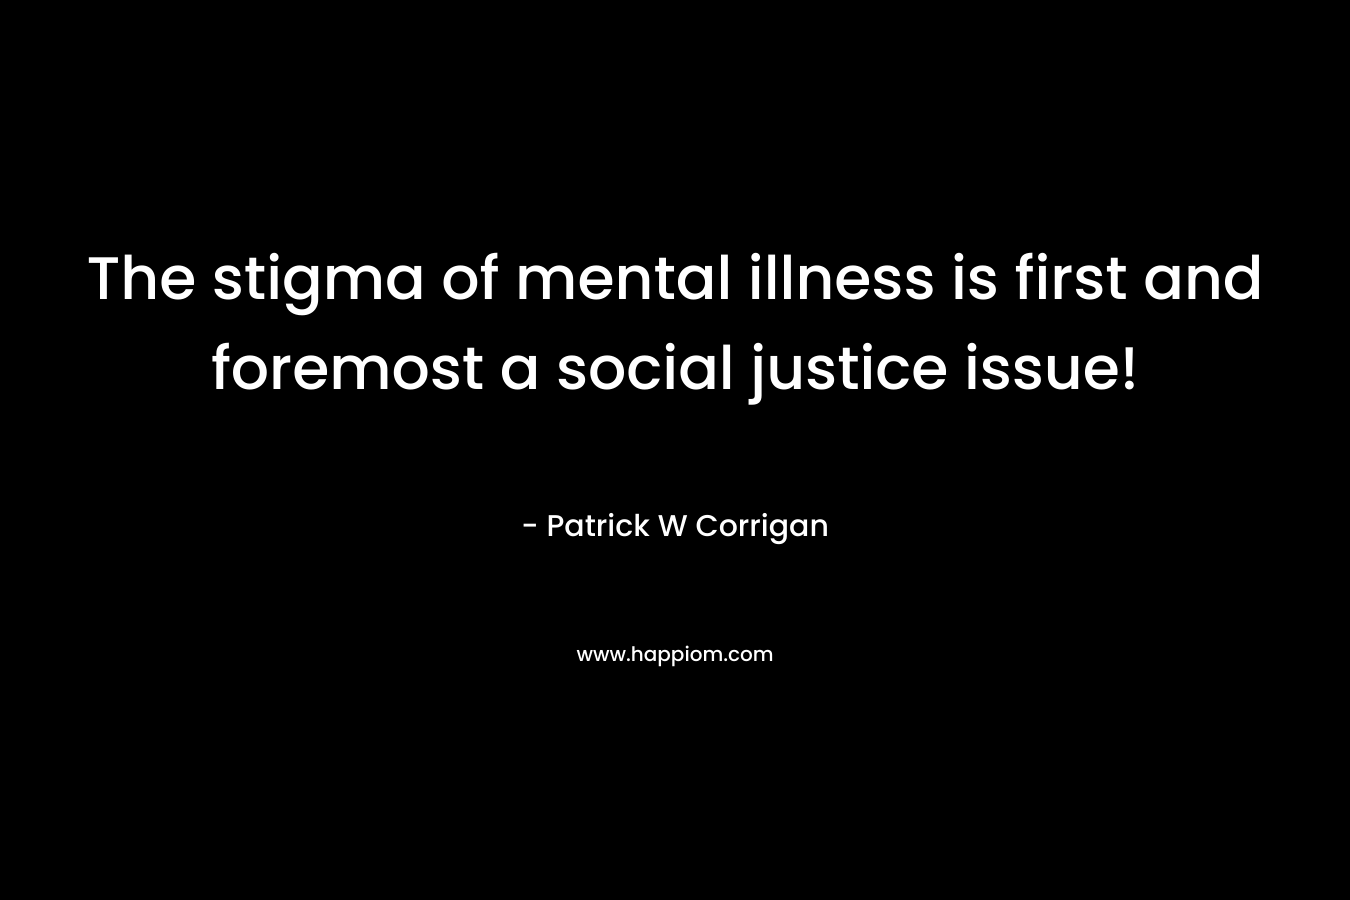 The stigma of mental illness is first and foremost a social justice issue!